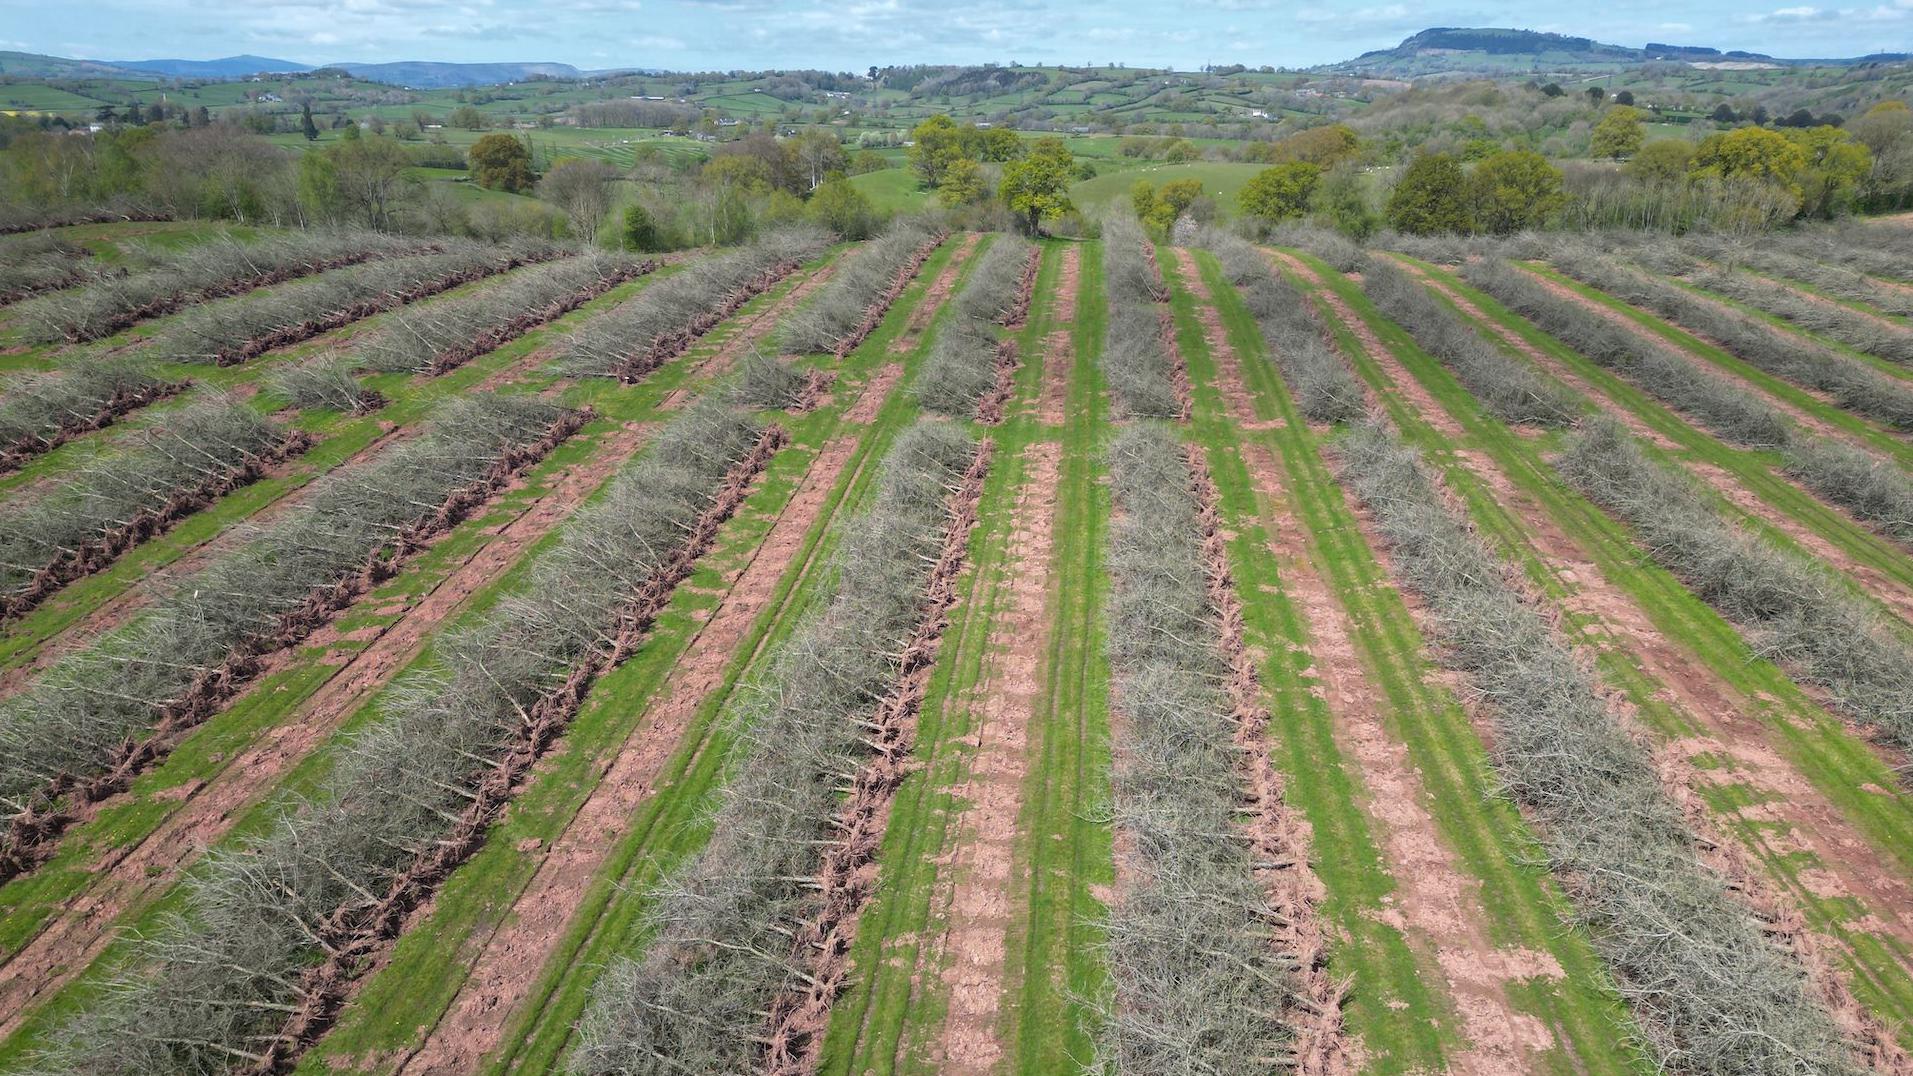 cider giant chops down orchard to sell land